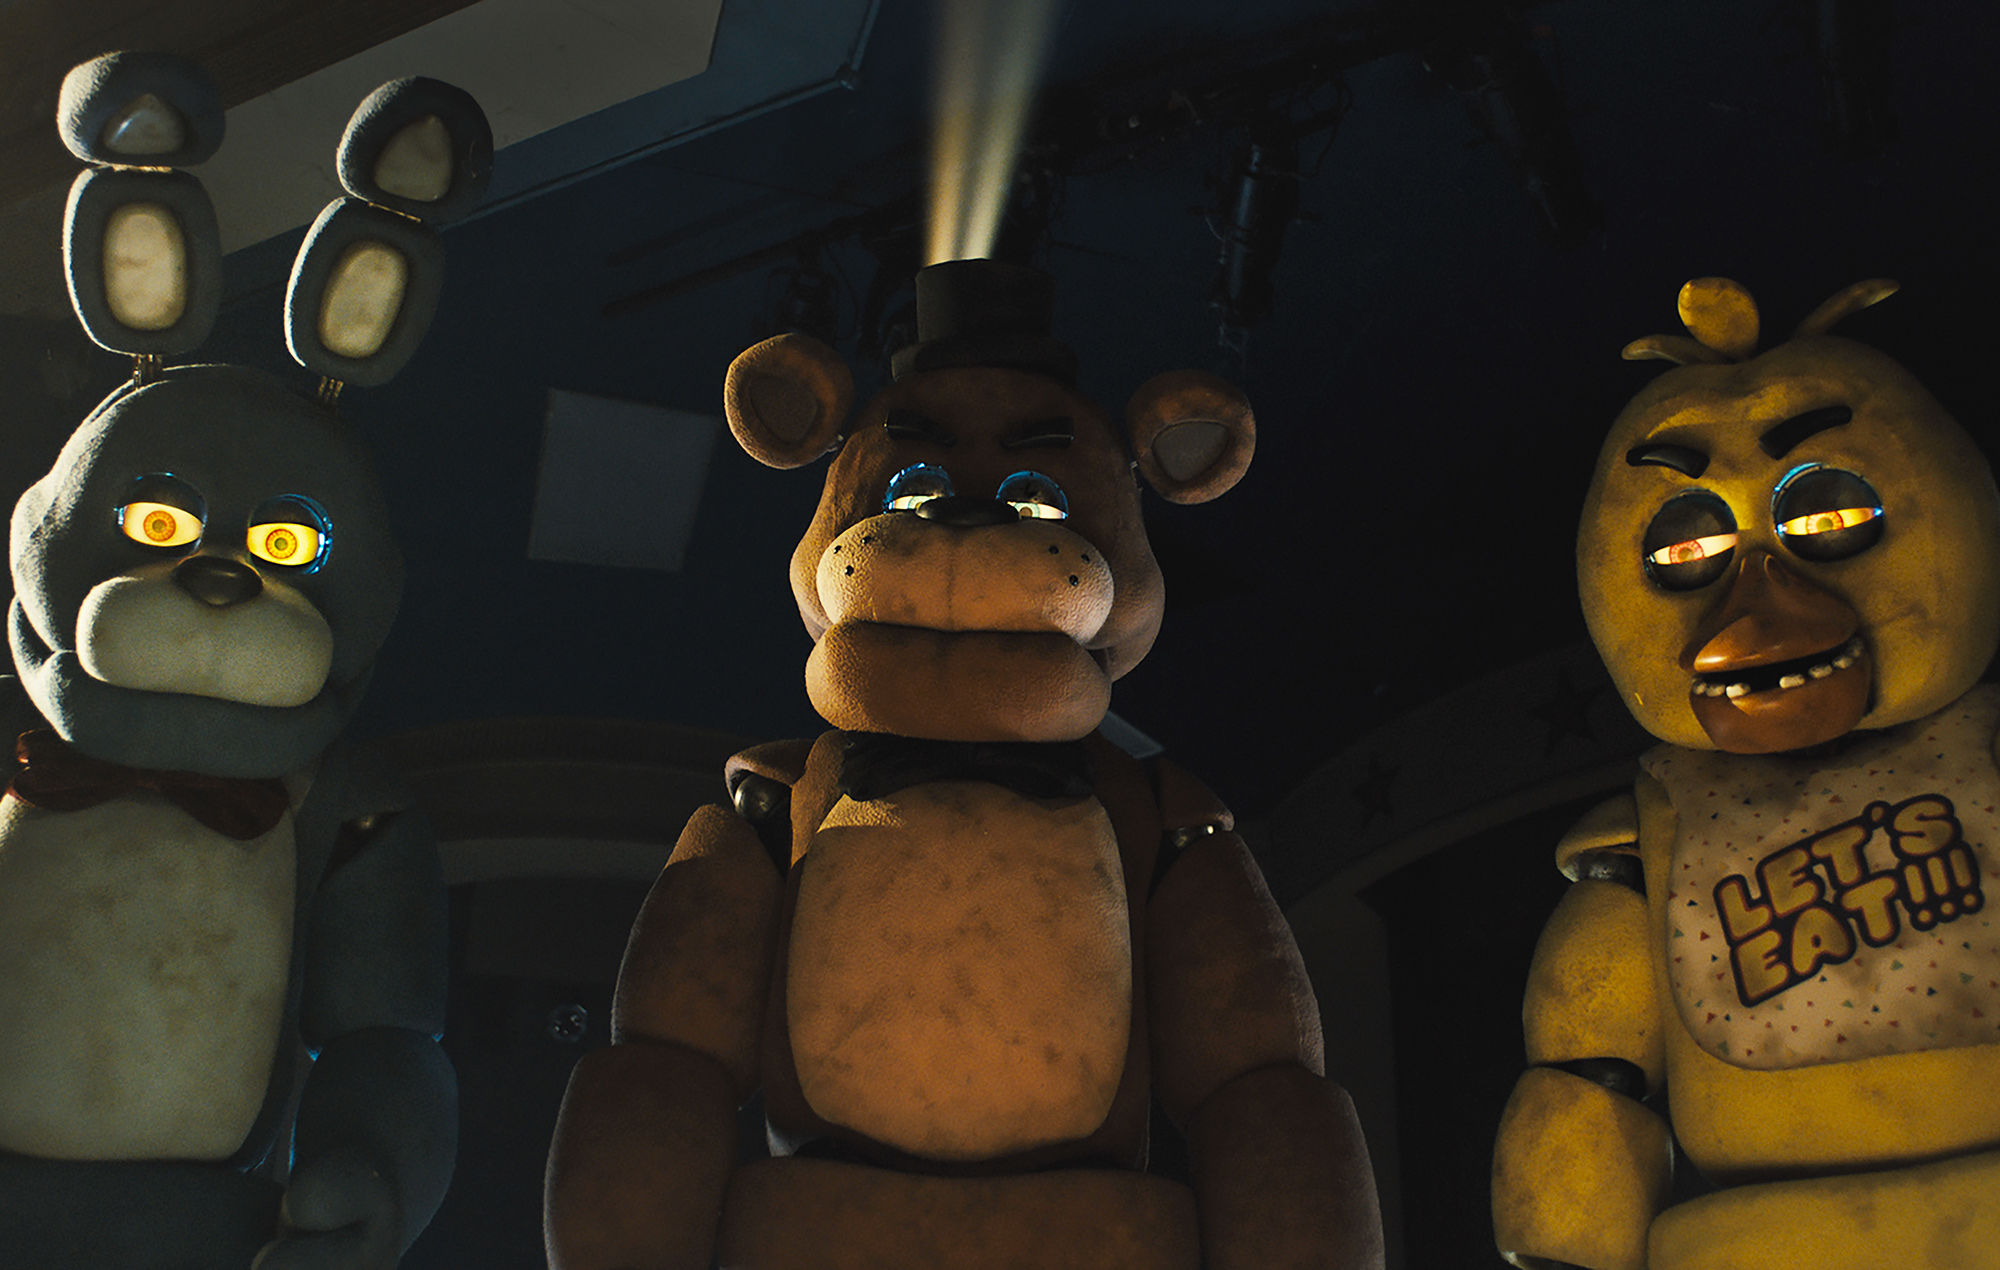 ‘Five Nights At Freddy’s’ sequel confirmed